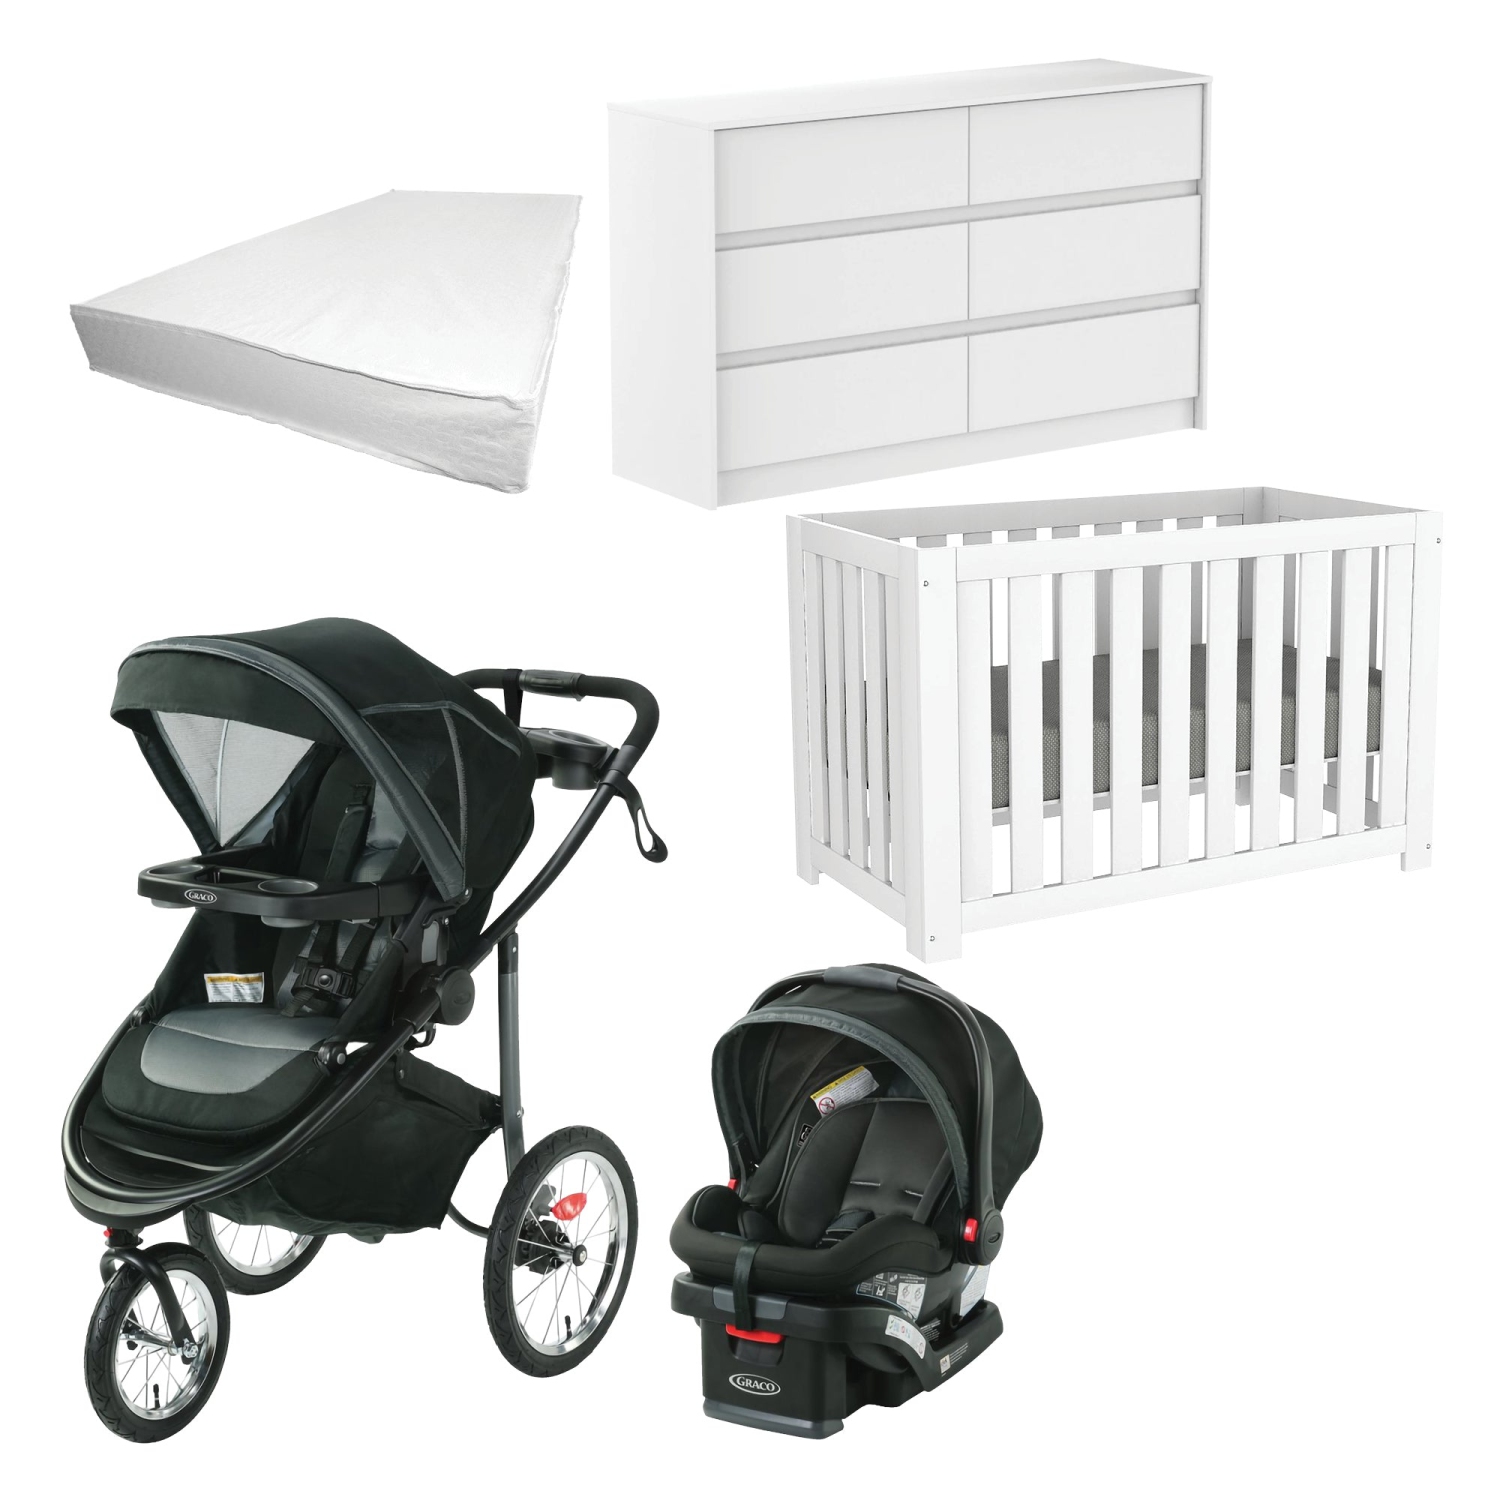 Quebec-Made Convertible Crib, Double Dresser & Canadian-Made Mattress with Graco Modes Jogger Stroller and Car Seat